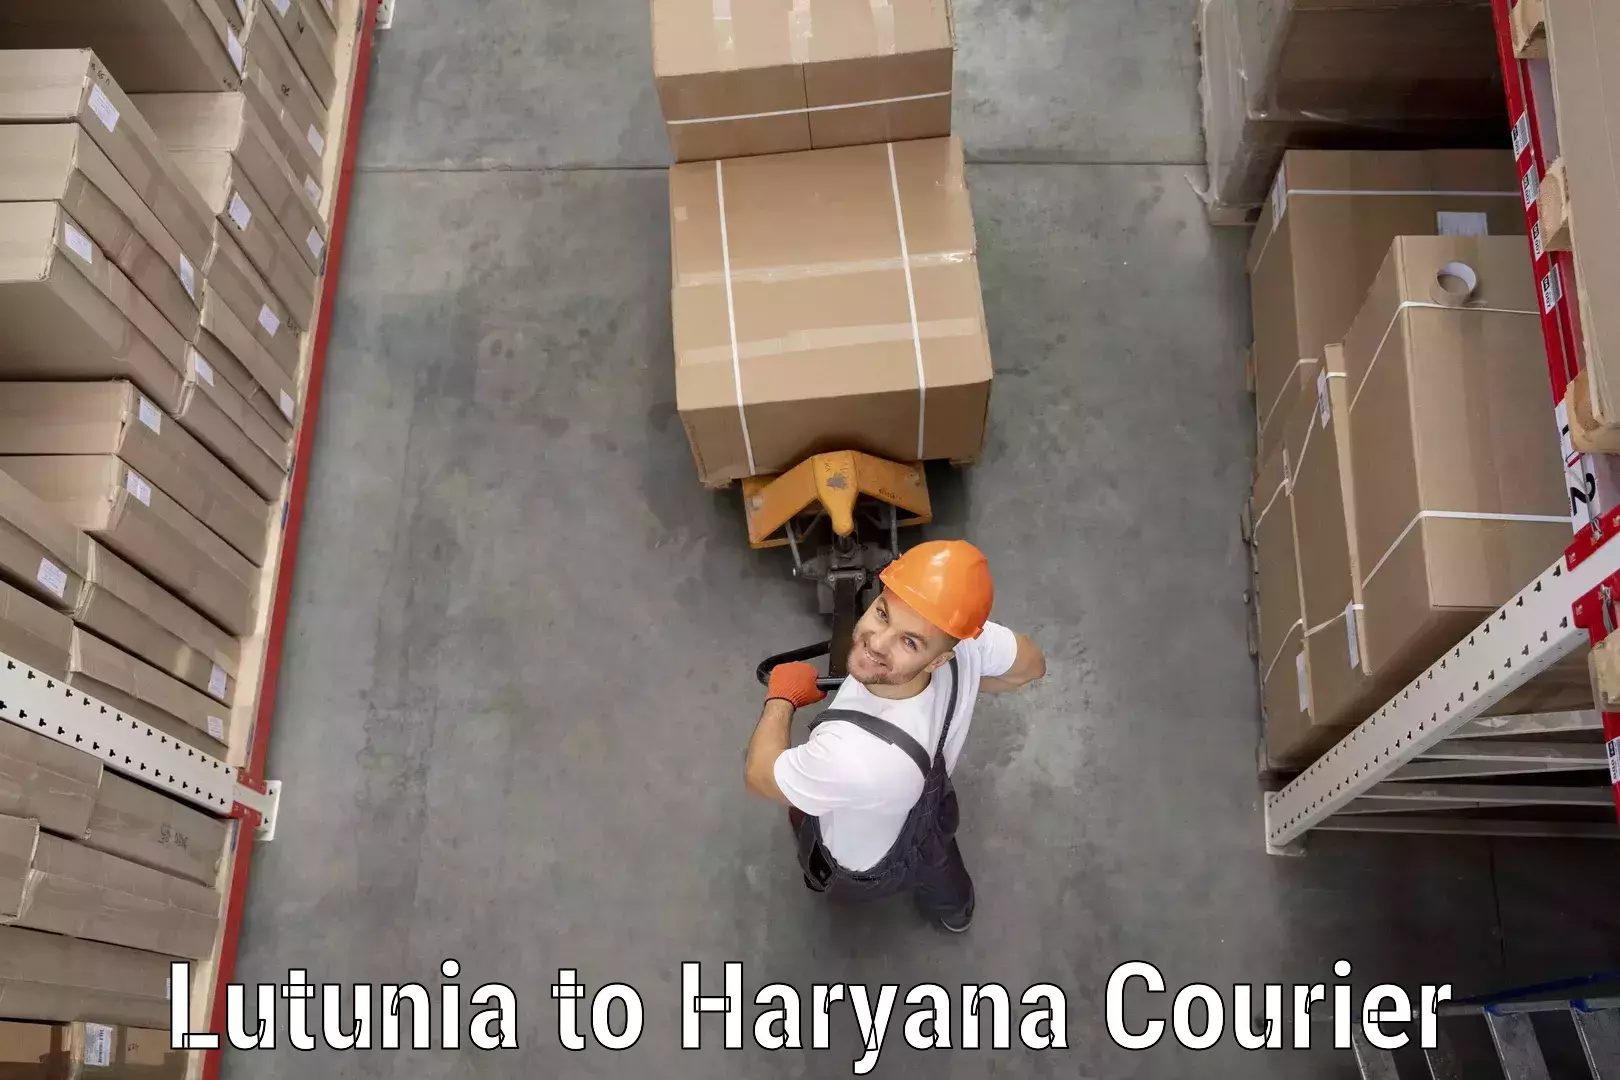 On-call courier service Lutunia to Haryana